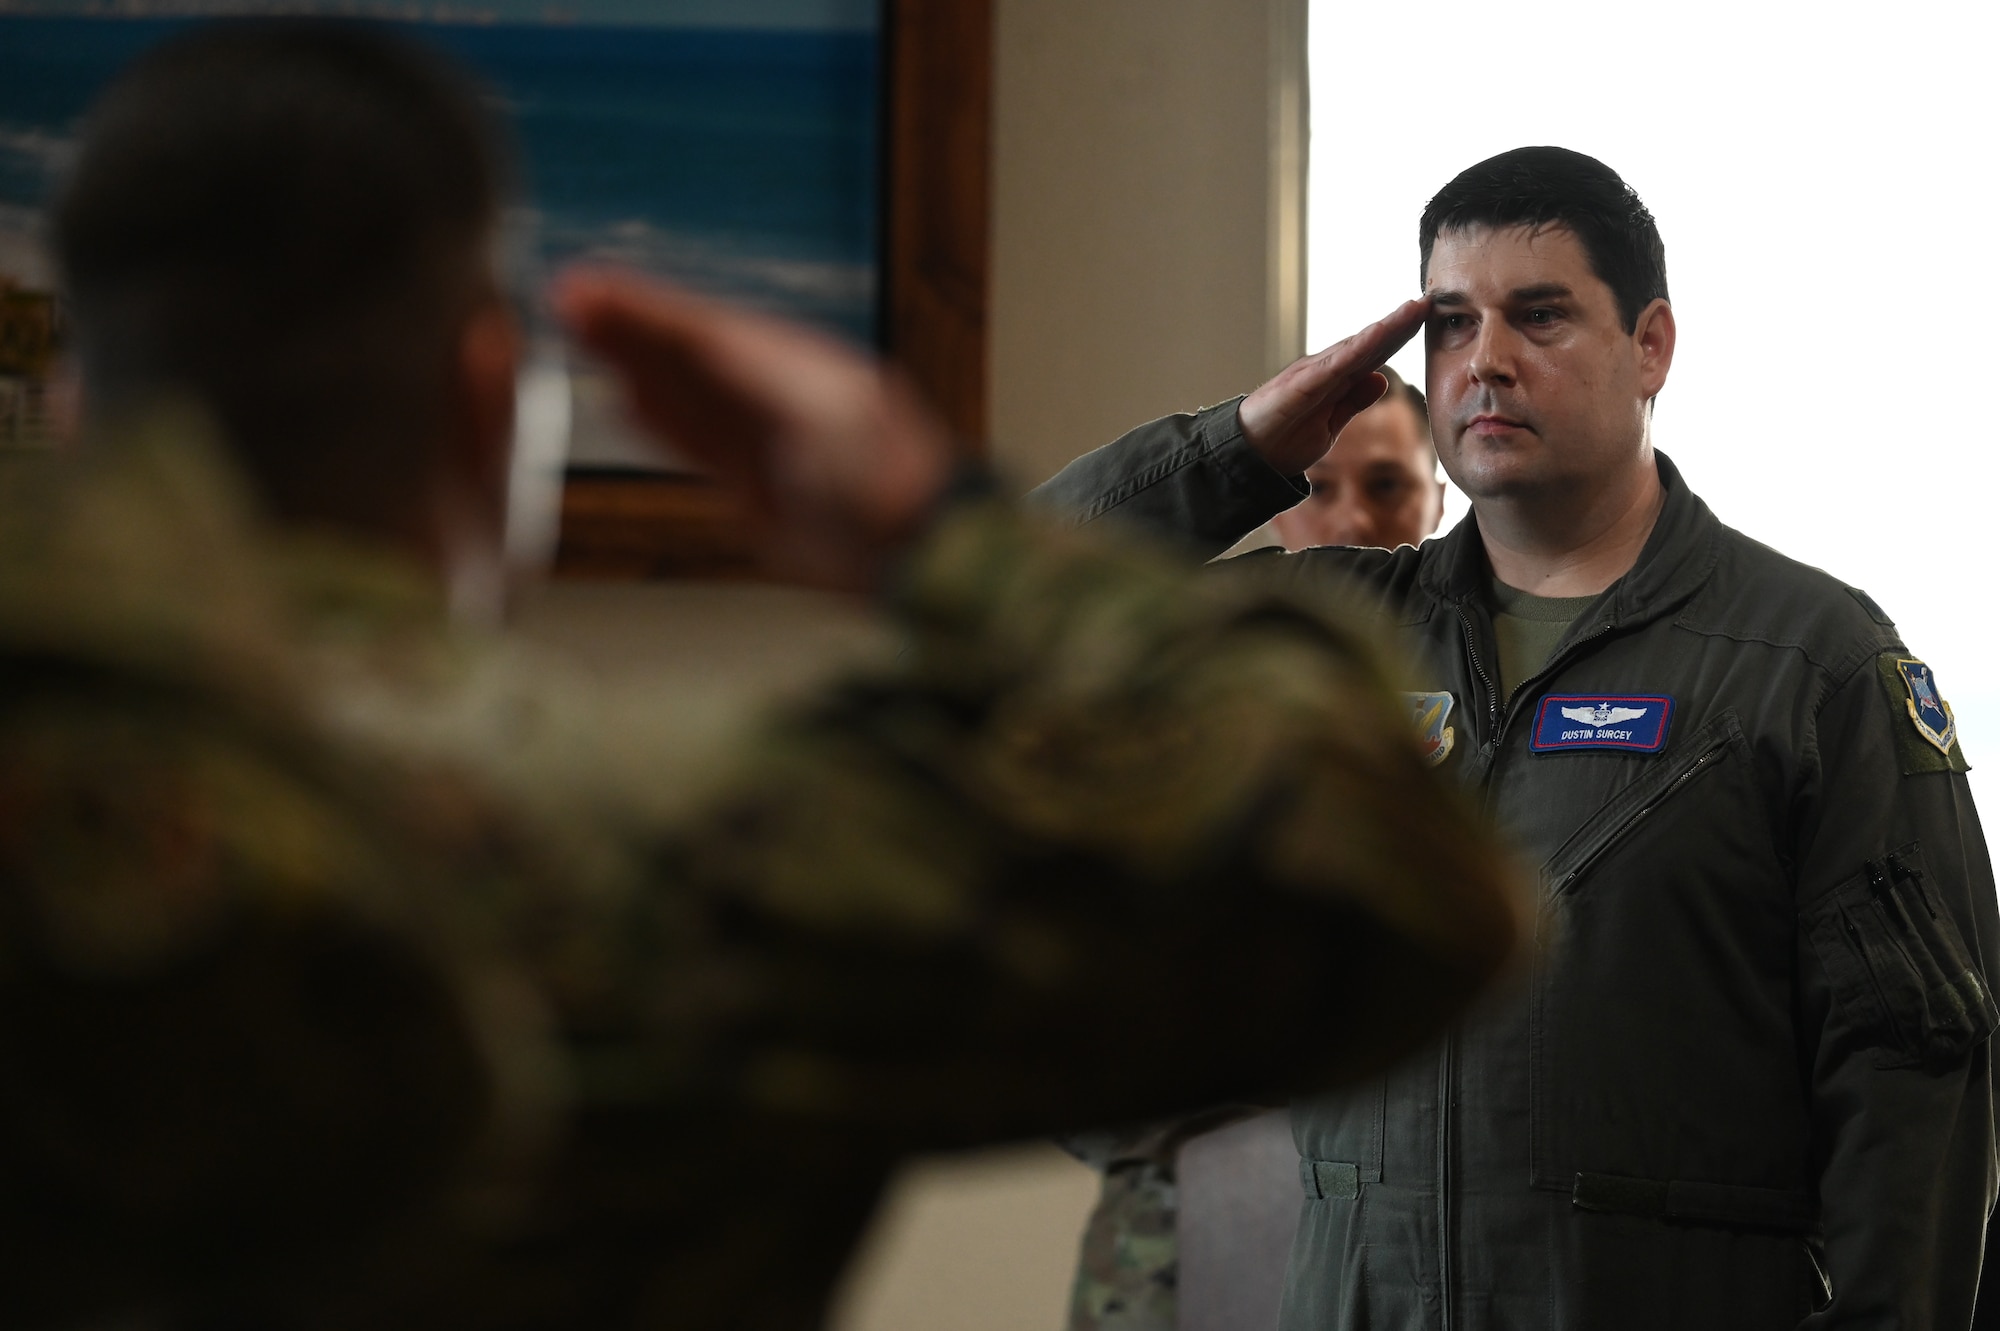 U.S. Air Force Lt. Col. Dustin Surcey, 39th Electronic Warfare Squadron commander, renders his first salute to the 39th EWS during his change of command ceremony at Eglin Air Force Base, Fla., Jan. 19, 2024. The 39th EWS was activated in 2020 ahead of the standup of the 350th Spectrum Warfare Wing, which was activated in 2021. (U.S. Air Force photo by Capt. Benjamin Aronson)